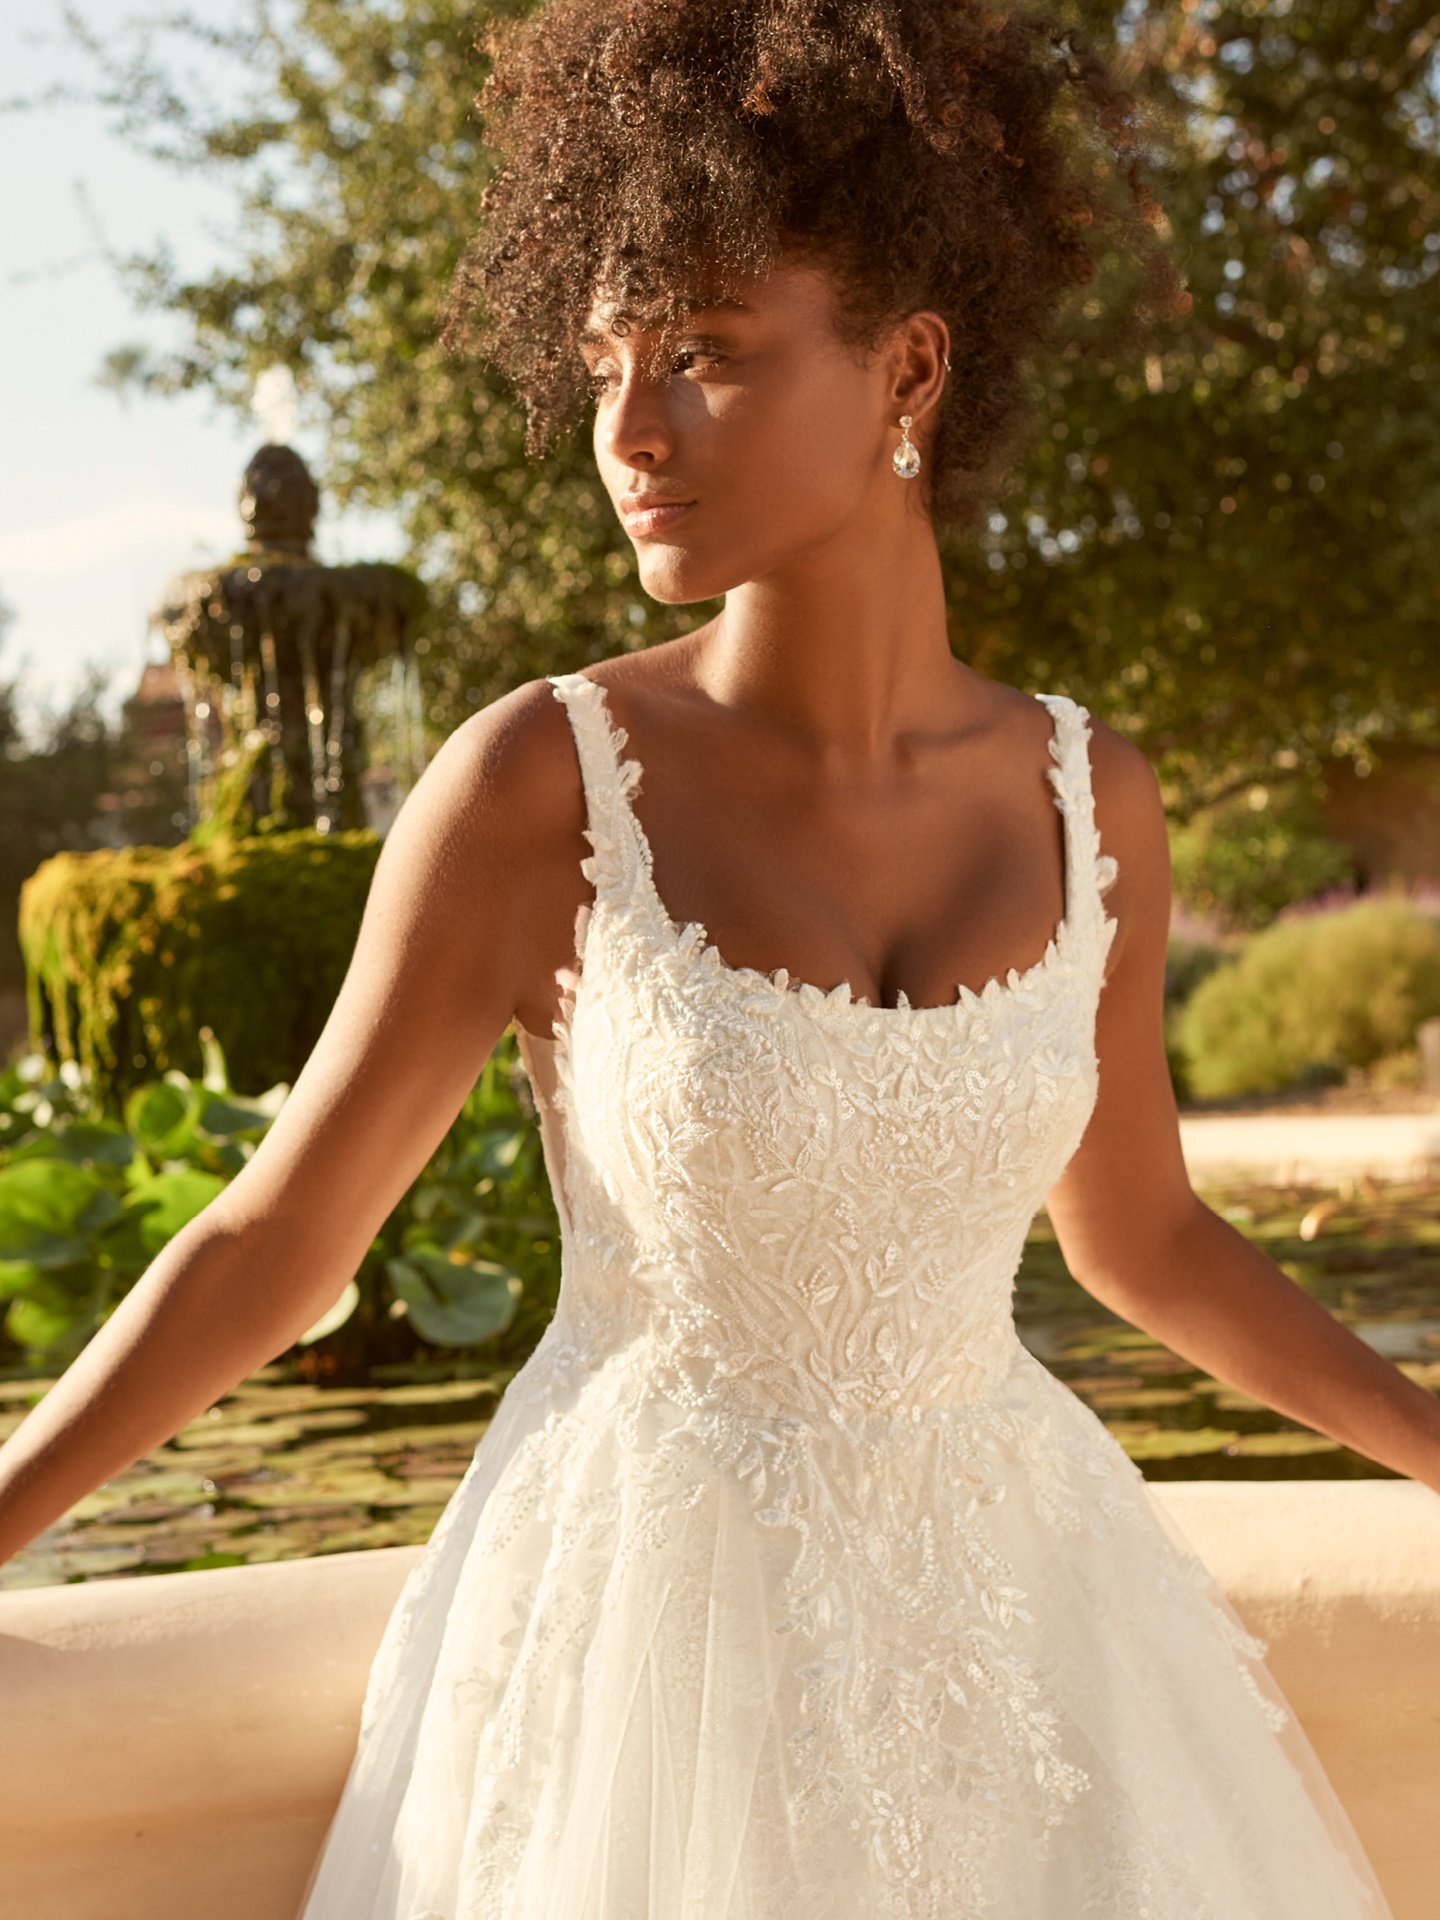 Chicago Wedding Dress Showroom – Grace Loves Lace US